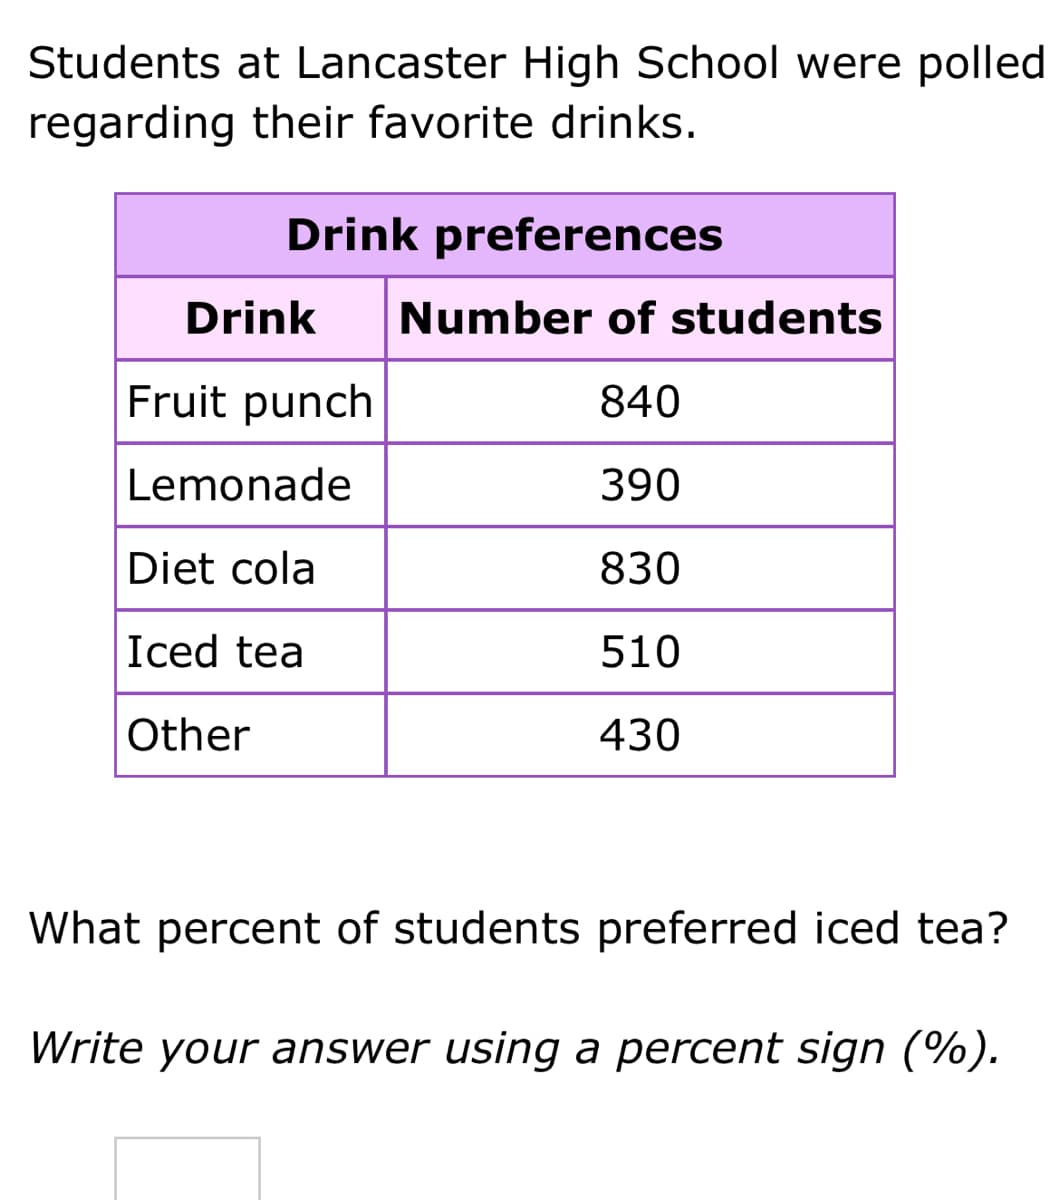 Students at Lancaster High School were polled
regarding their favorite drinks.
Drink preferences
Drink
Number of students
Fruit punch
840
Lemonade
390
Diet cola
830
Iced tea
510
Other
430
What percent of students preferred iced tea?
Write your answer using a percent sign (%).
